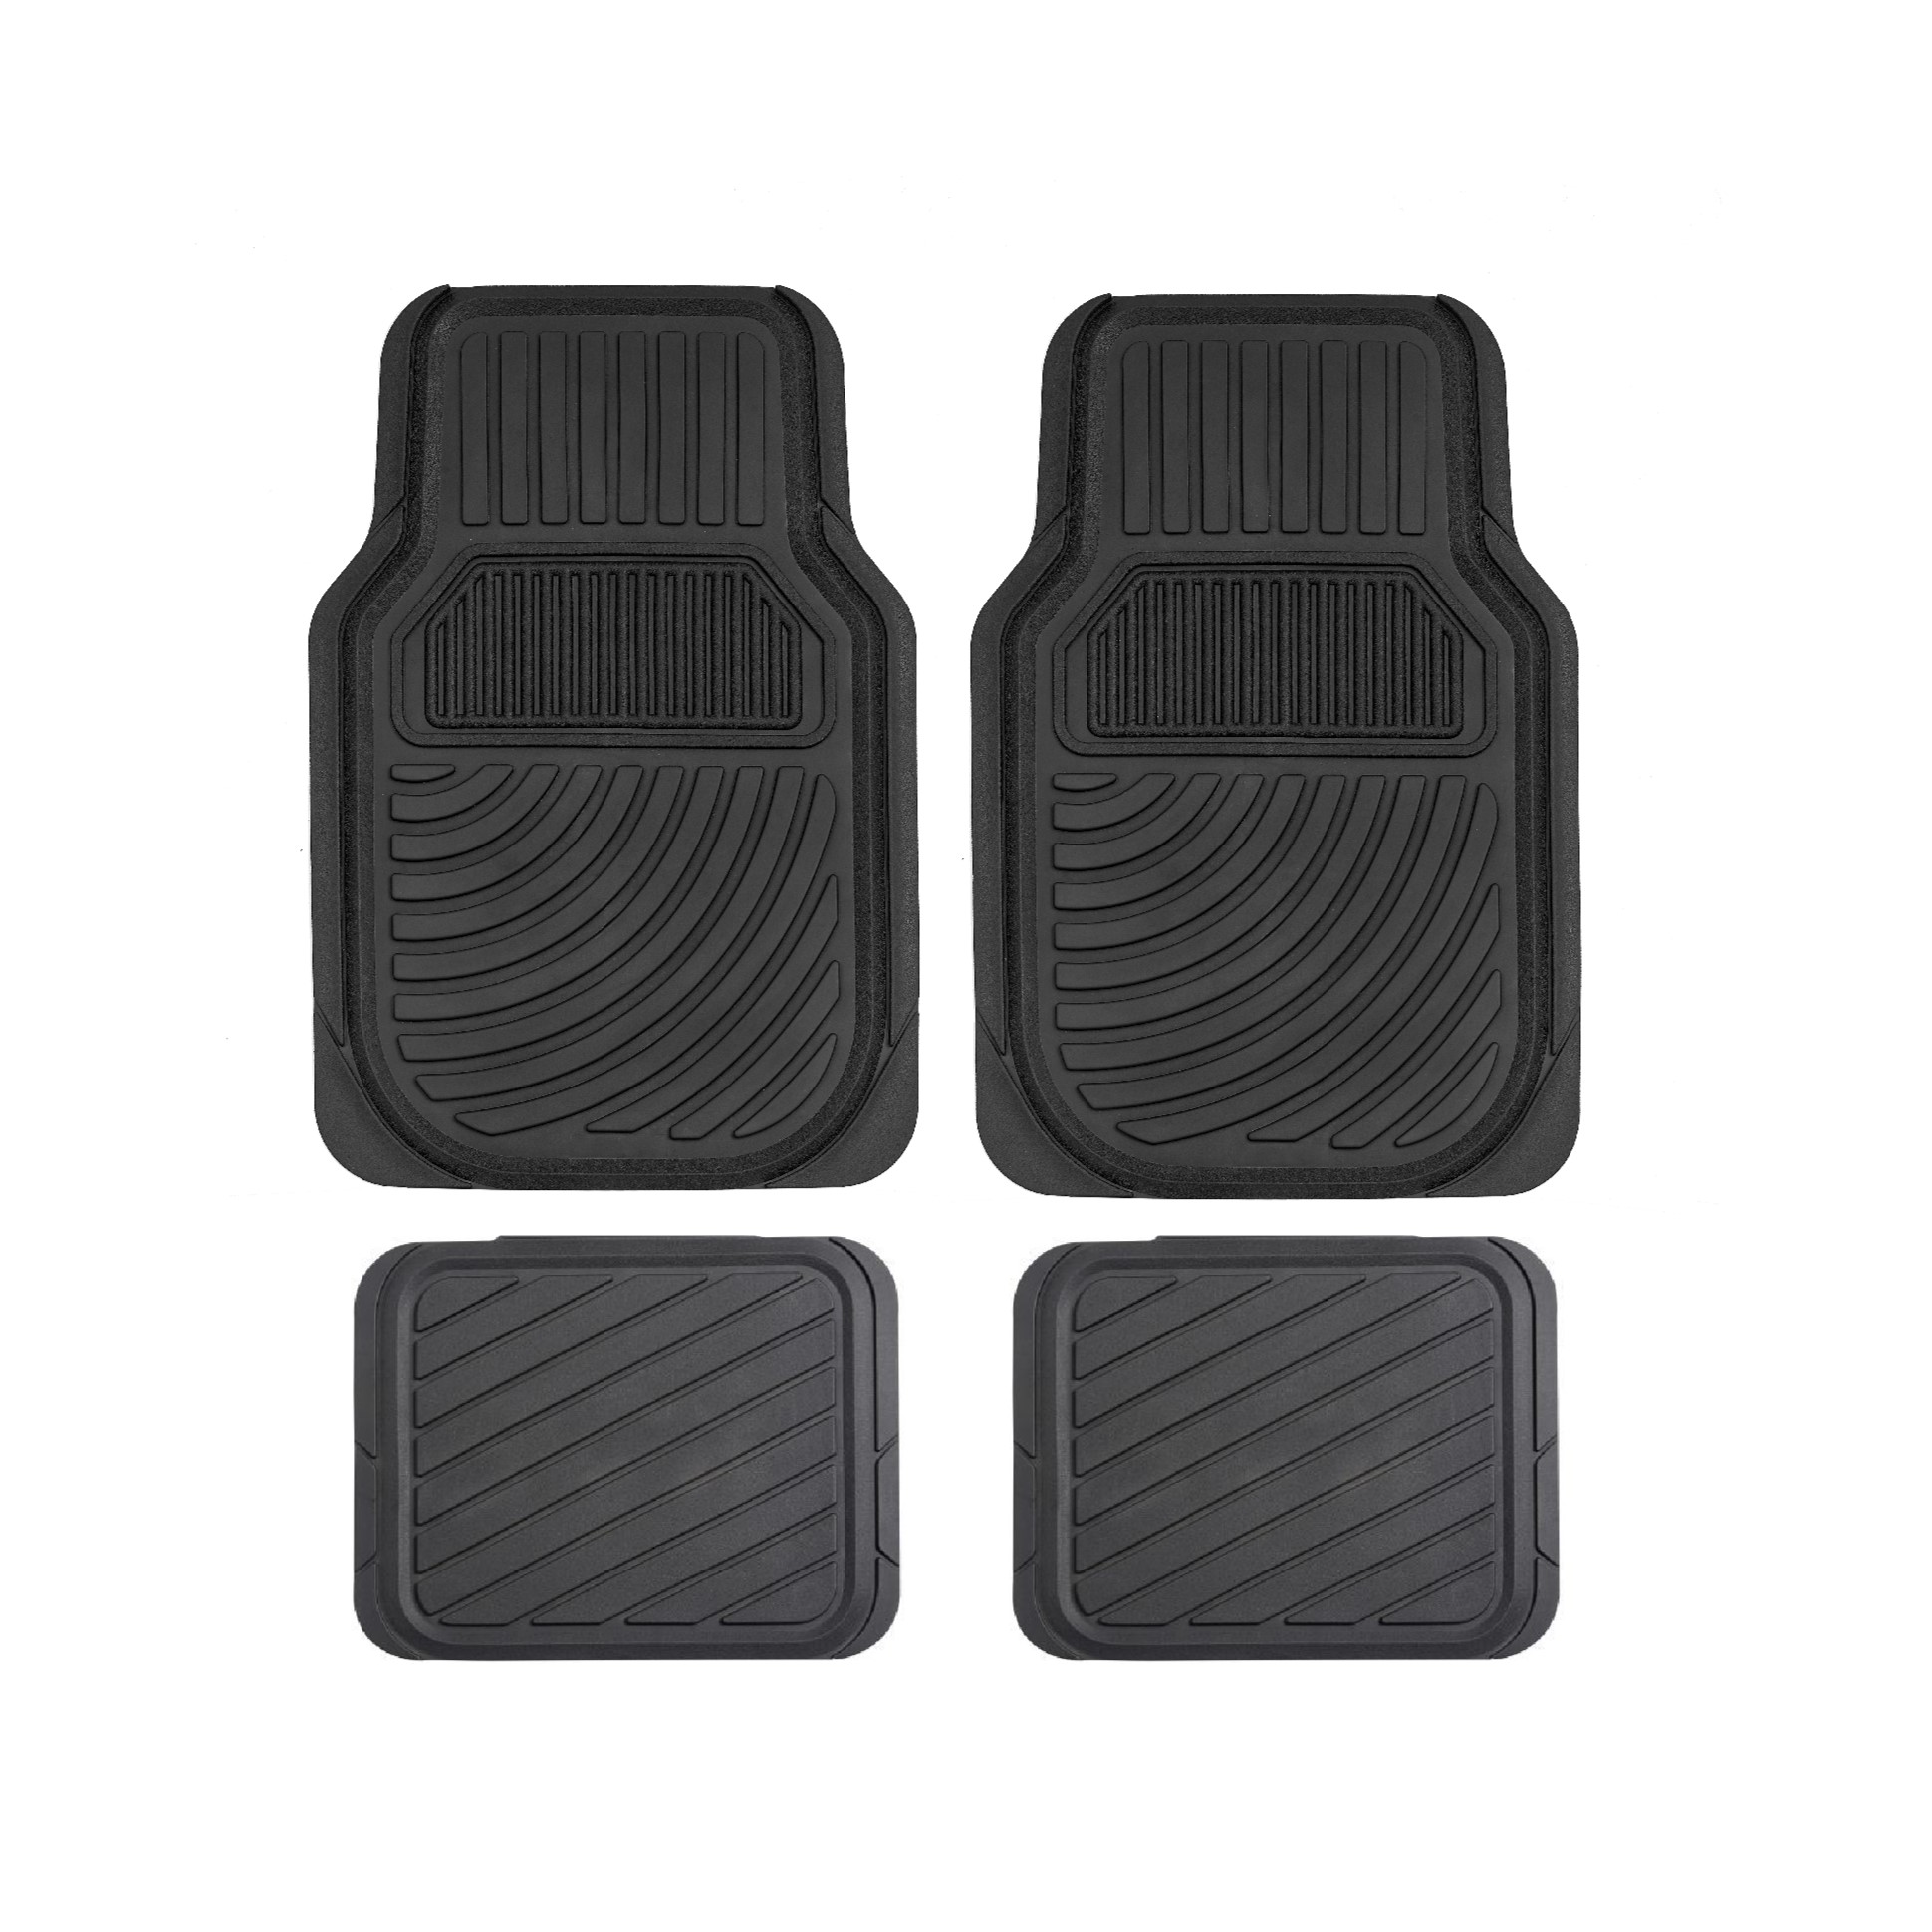 4-Piece Black Rubber All-Season Trim-to-Fit Floor Mats for Cars, Trucks and SUVs 5131